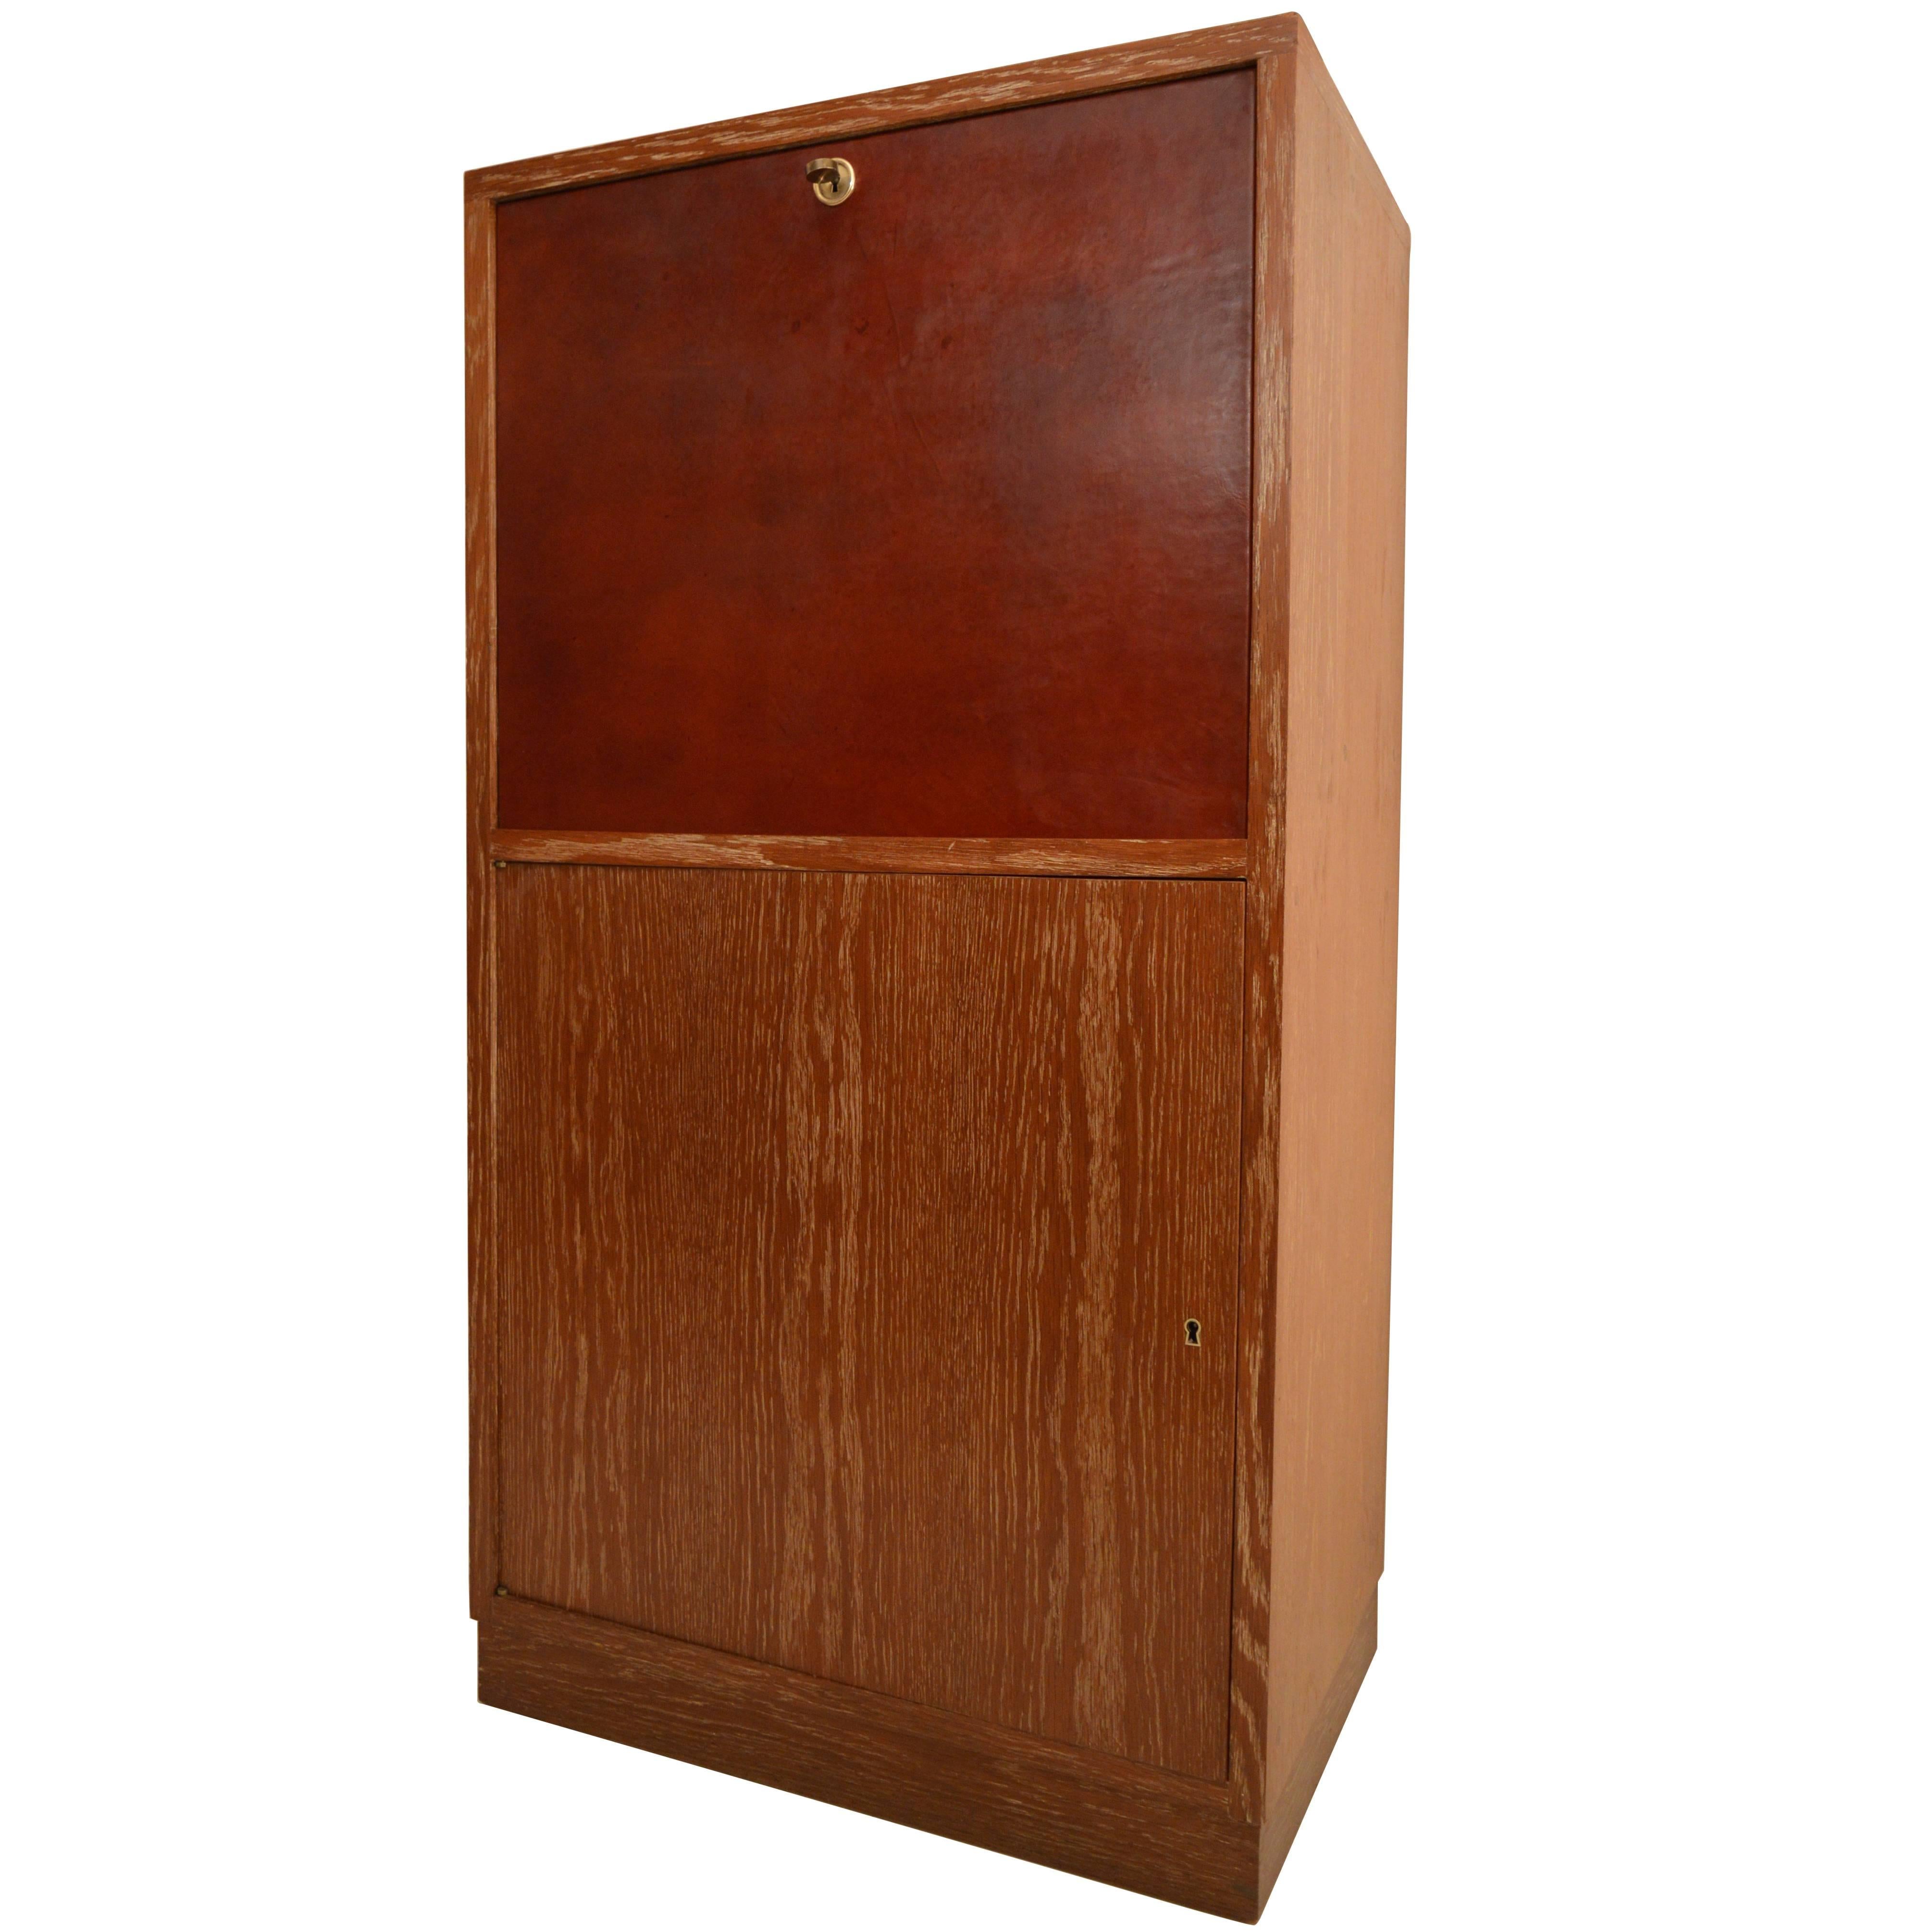 Art Deco Secretary in Oak with Door Covered in Core-Leather by Charles Dudouyt